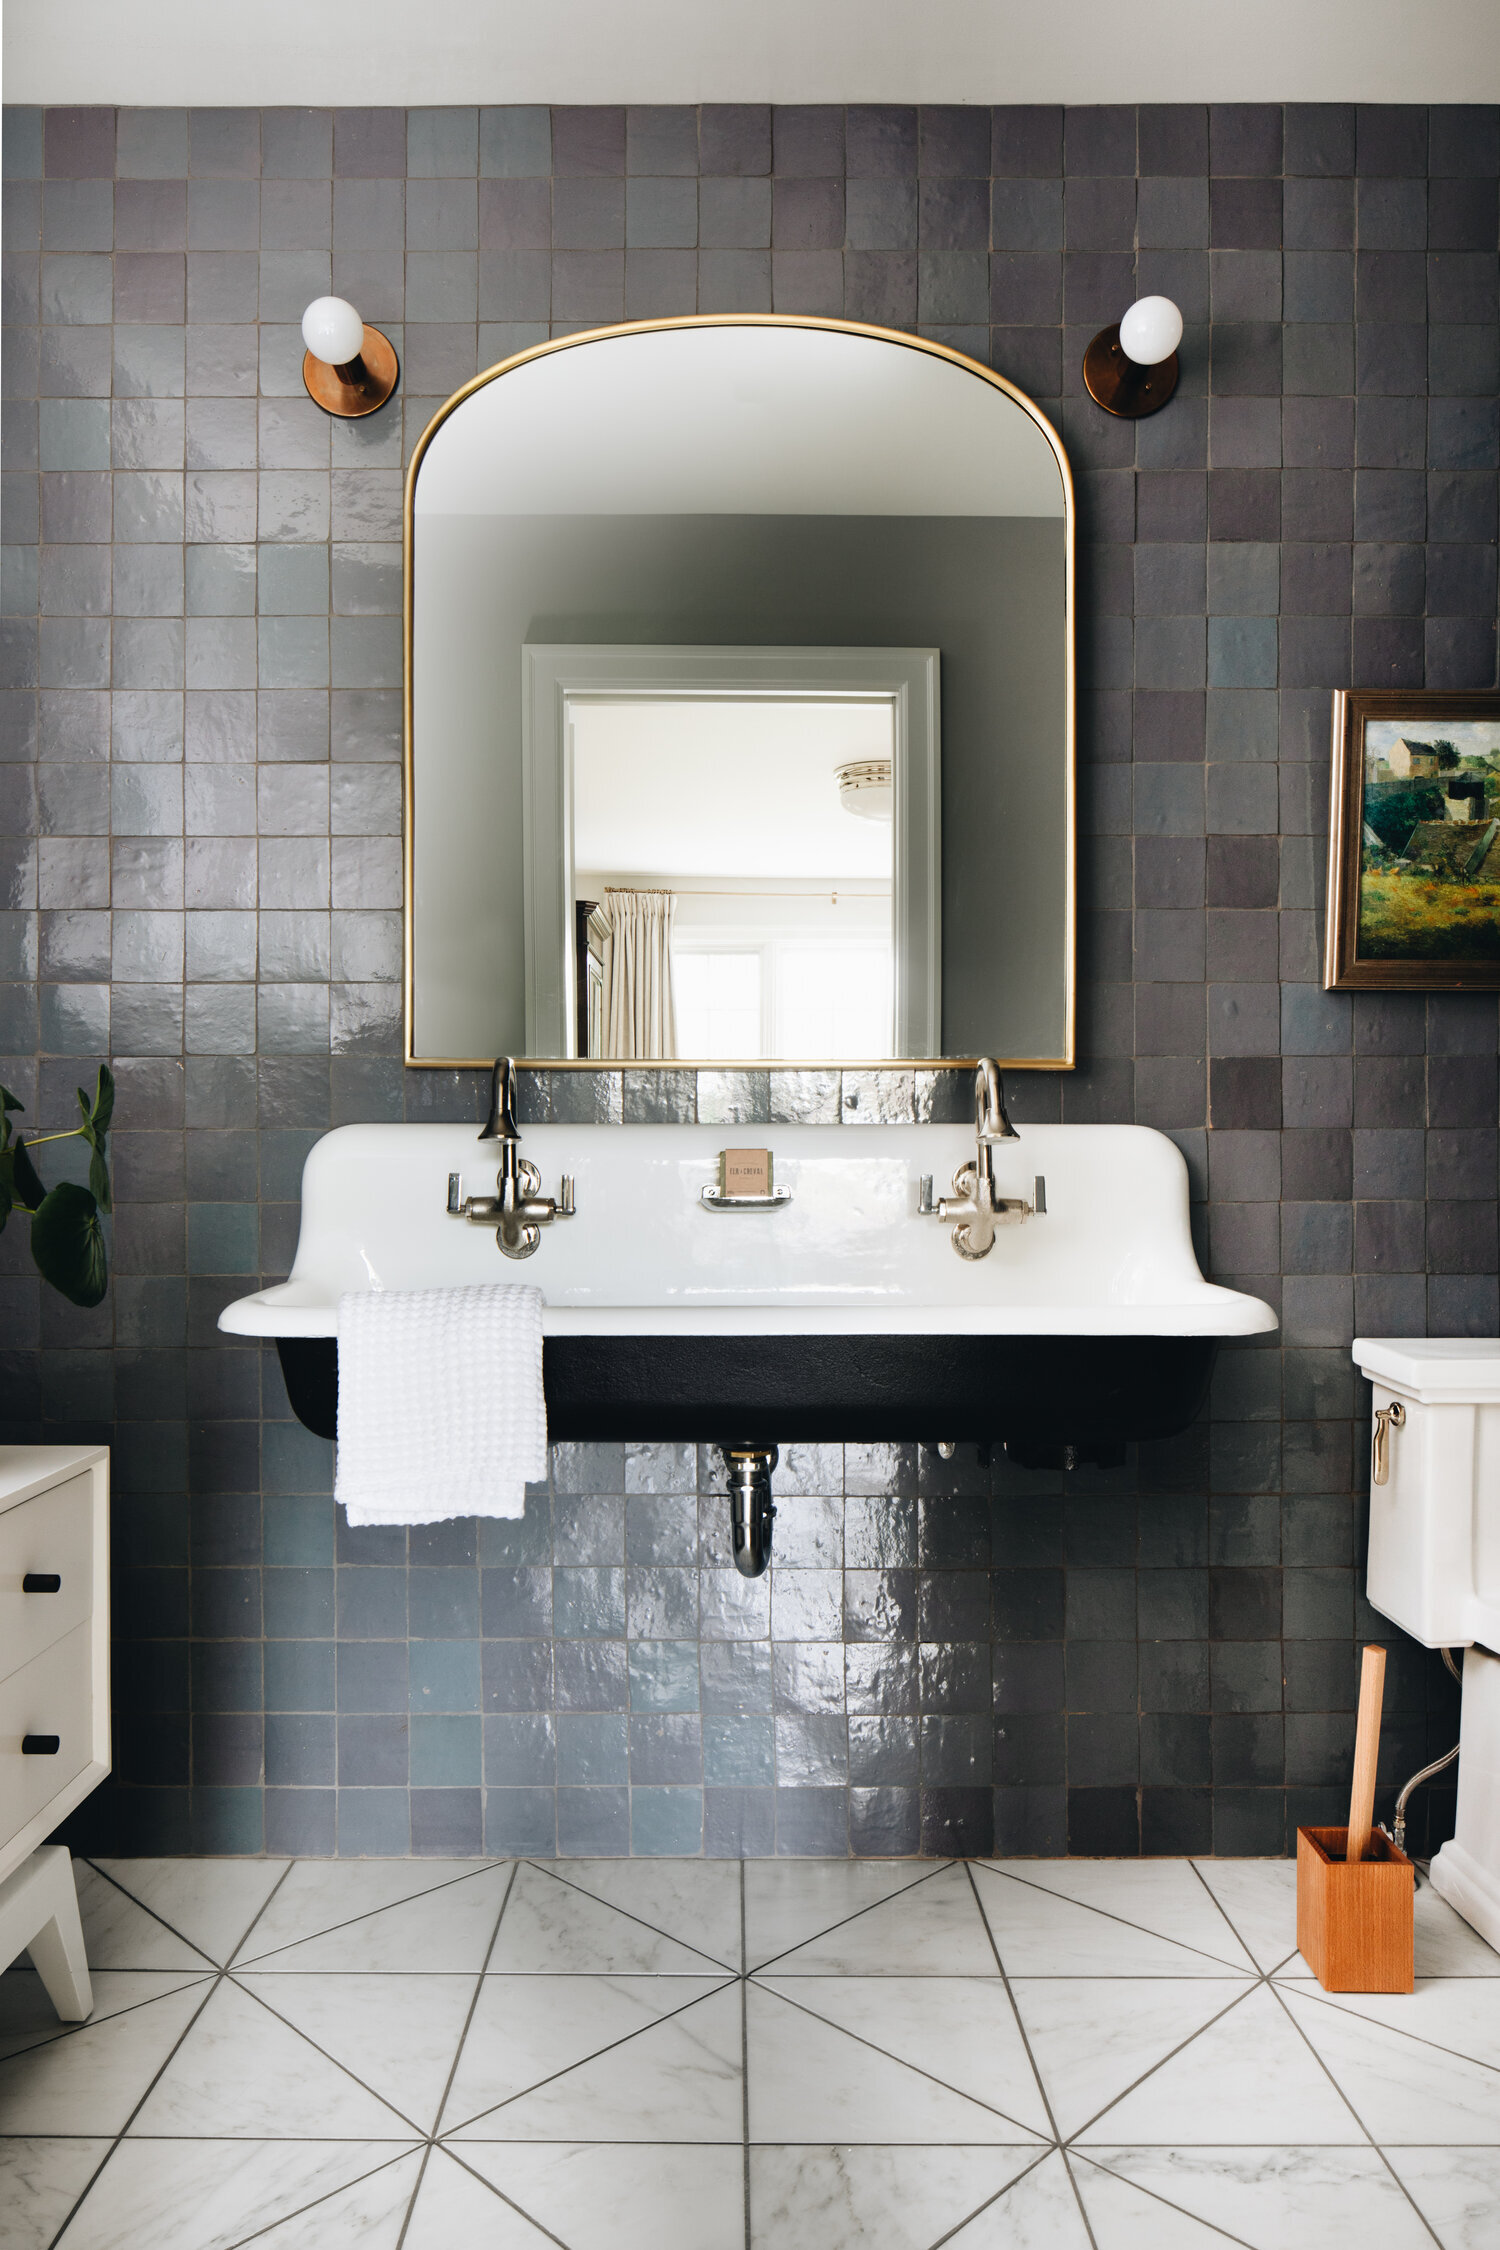 How to mix multiple metal finishes in a bathroom or kitchen. Tips for pairing complimentary metal fixture finishes. Brass, bronze, copper, nickel, chrome, and black metal finish tips. | Nadine Stay // Photo Source: Jean Stoffer Design